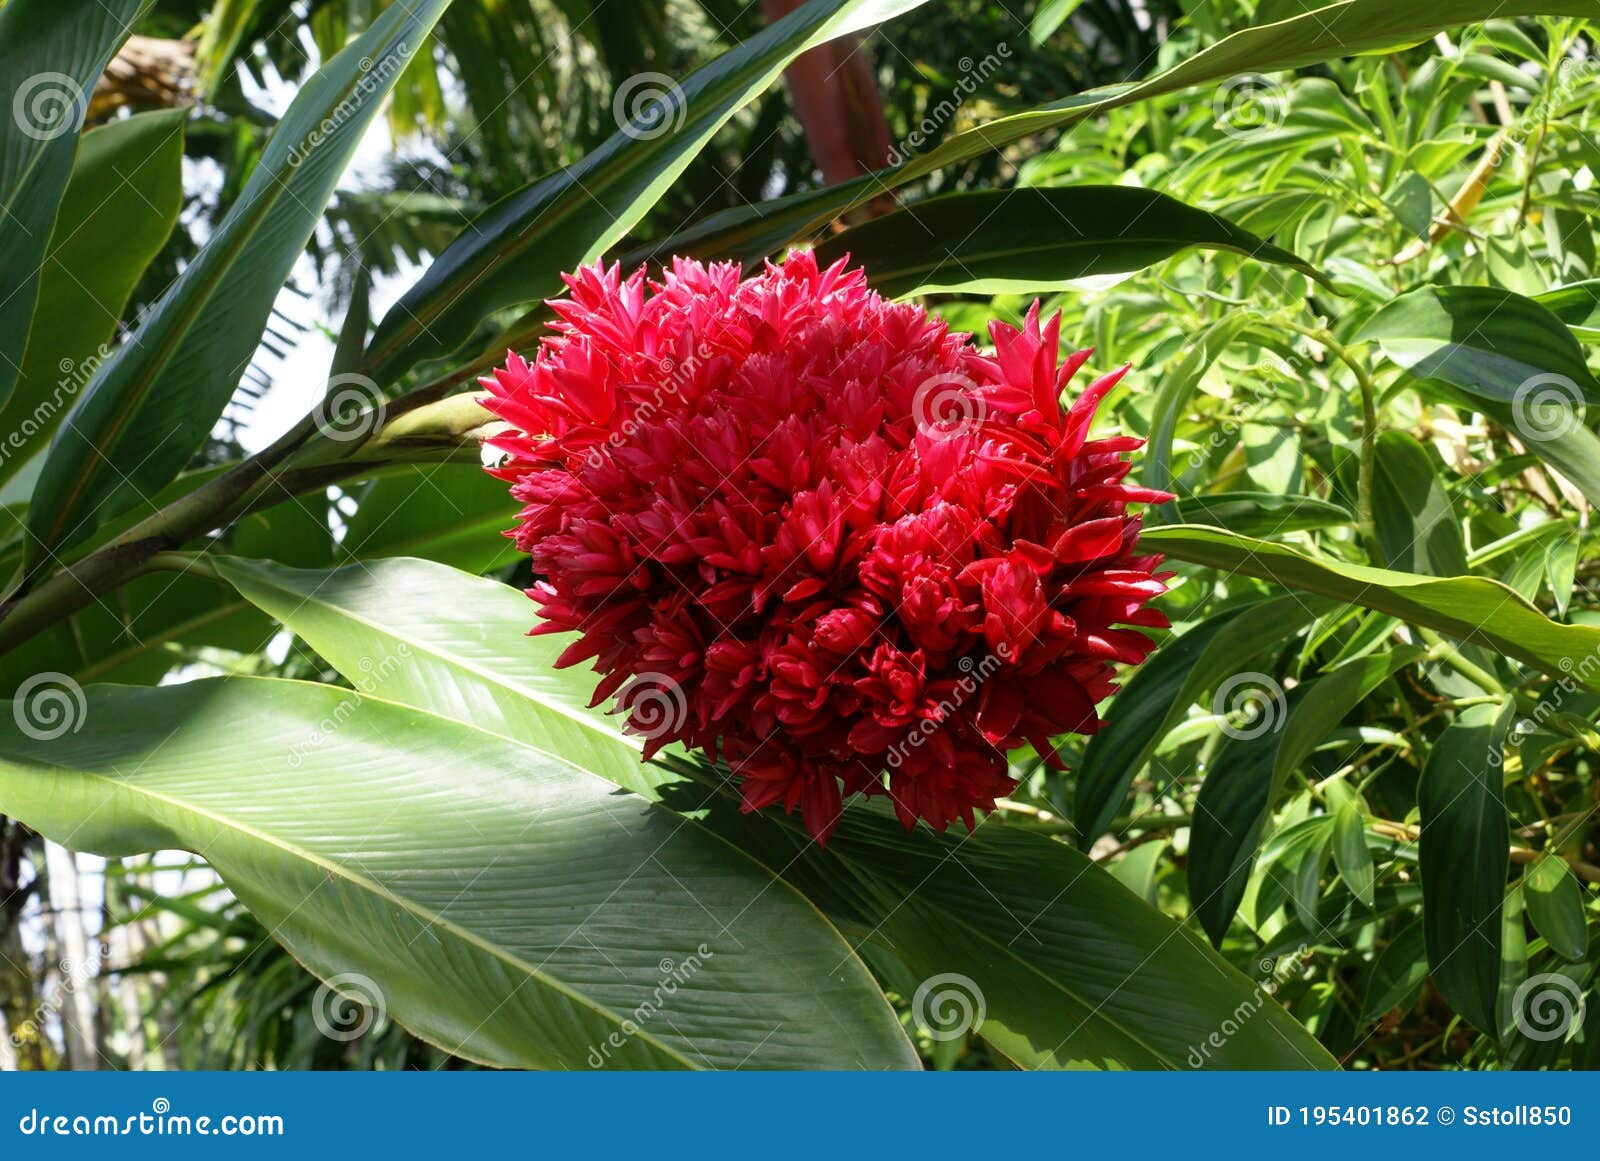 11 Tahitian Red Ginger Plant Photos Free Royalty Free Stock Photos From Dreamstime